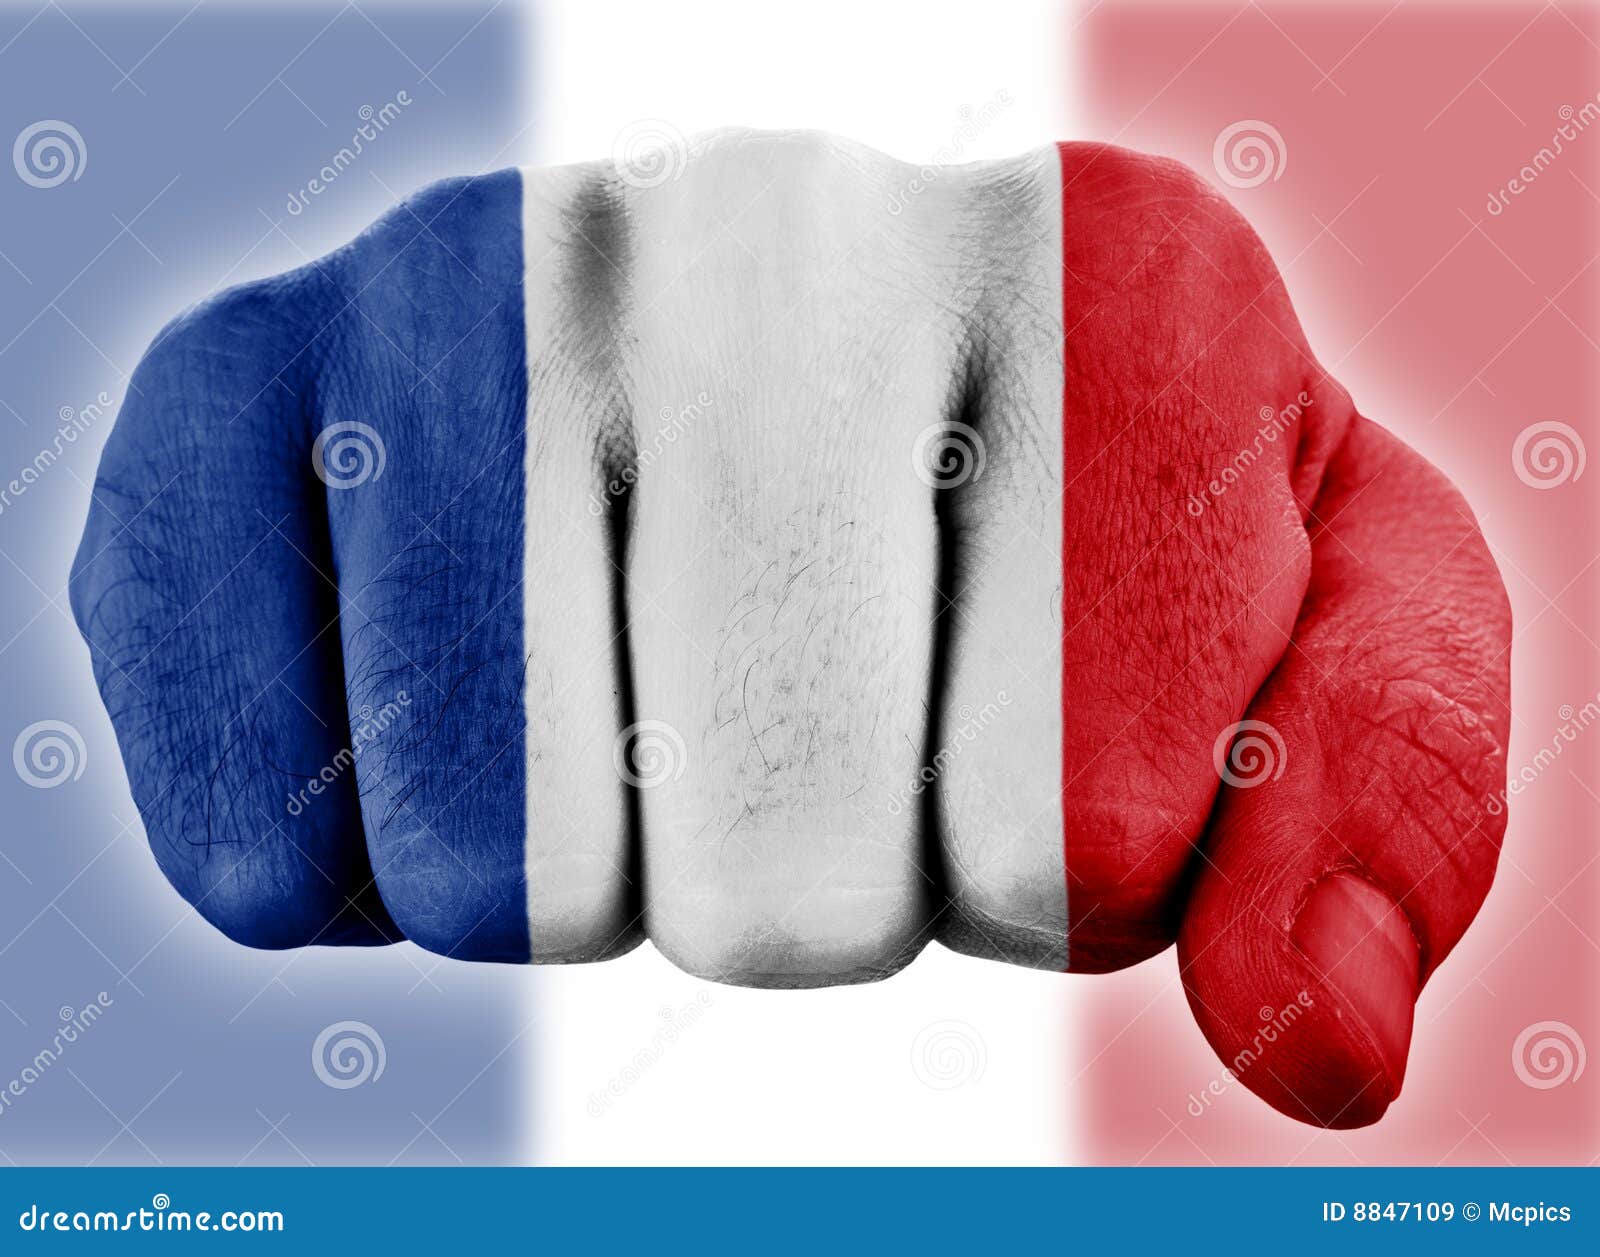 http://thumbs.dreamstime.com/z/fist-french-flag-8847109.jpg